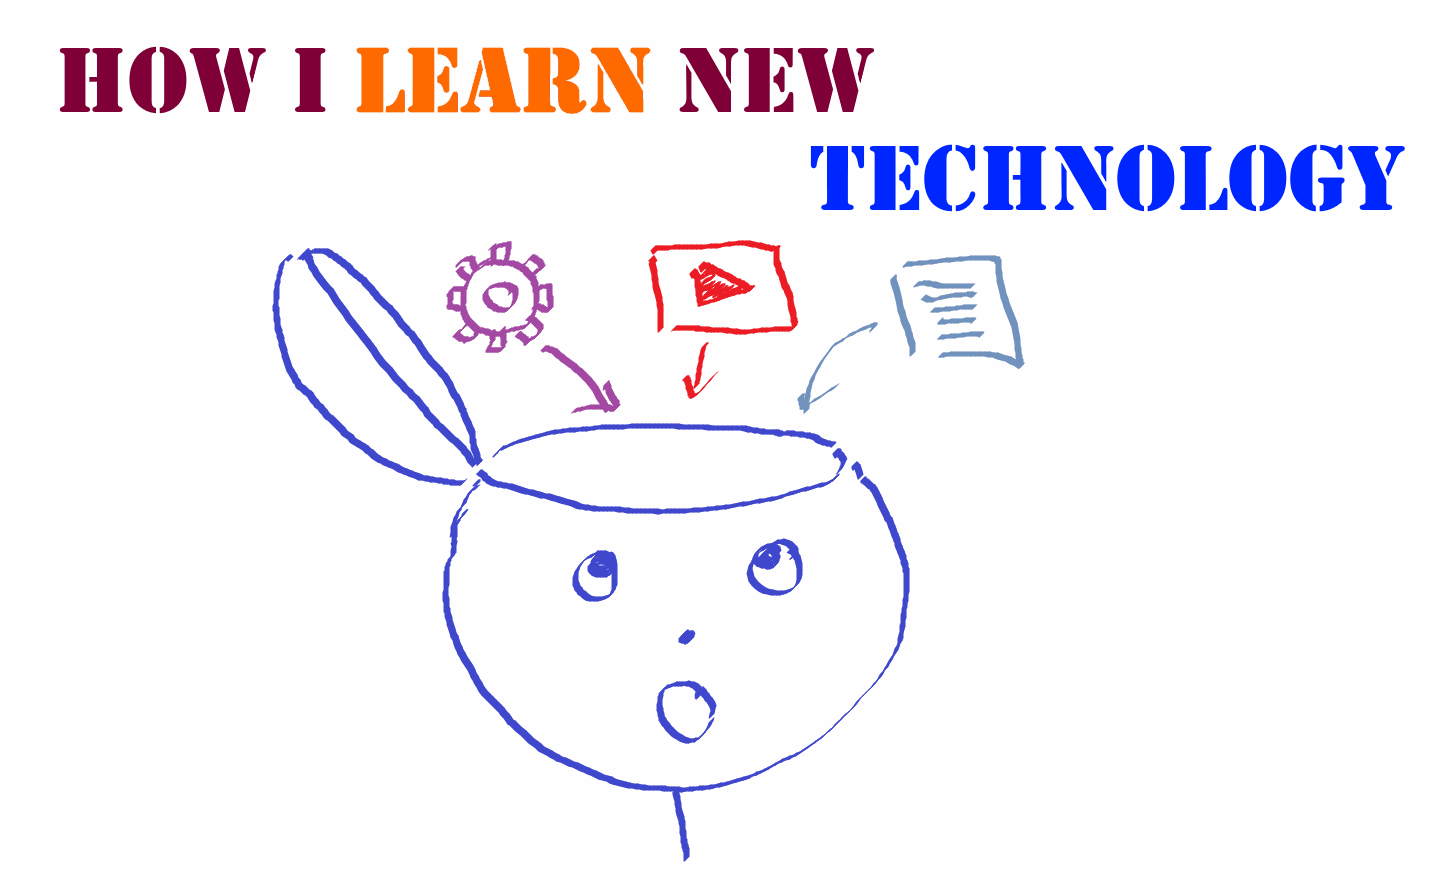 How I learn new technology